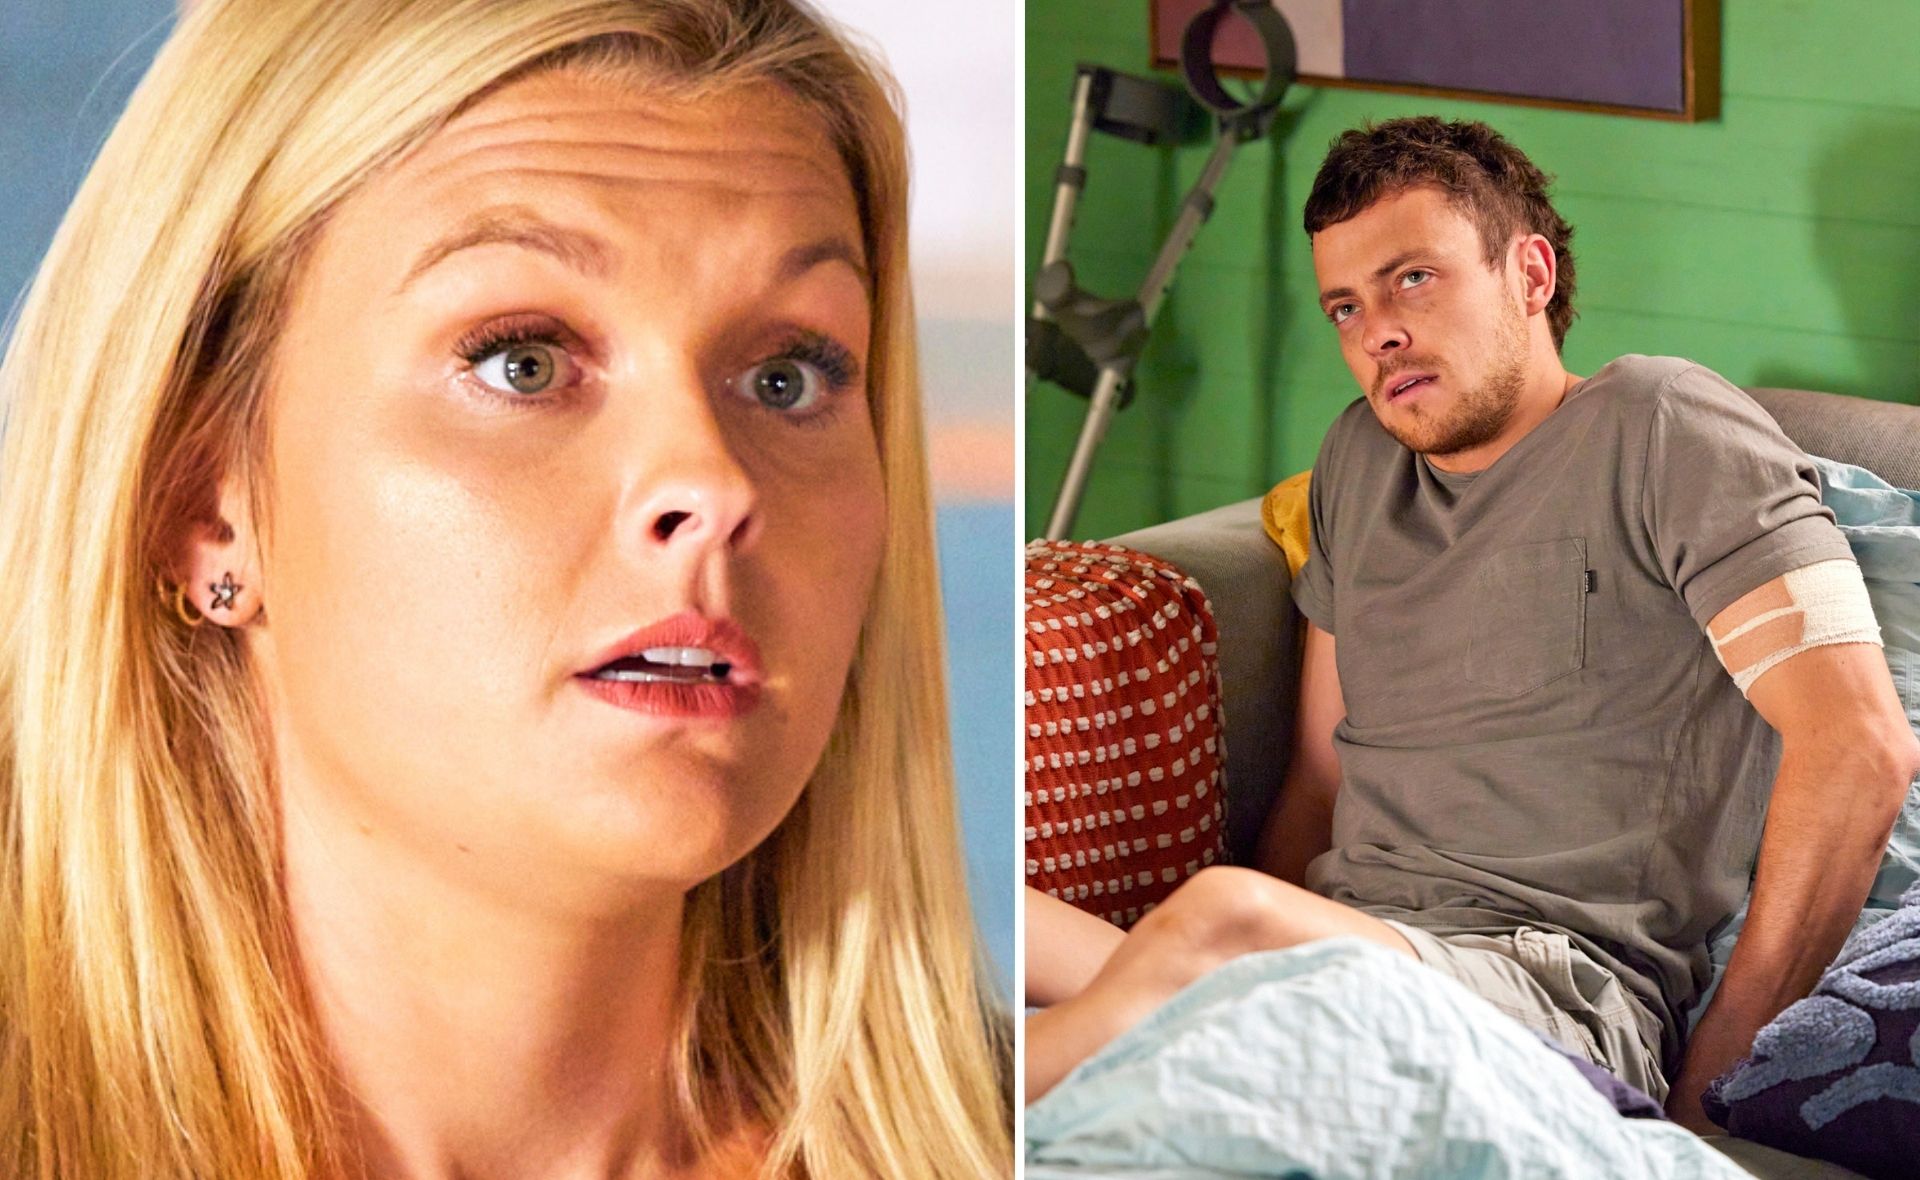 “I want you to leave!” Dean turns away a heartbroken Ziggy on Home and Away